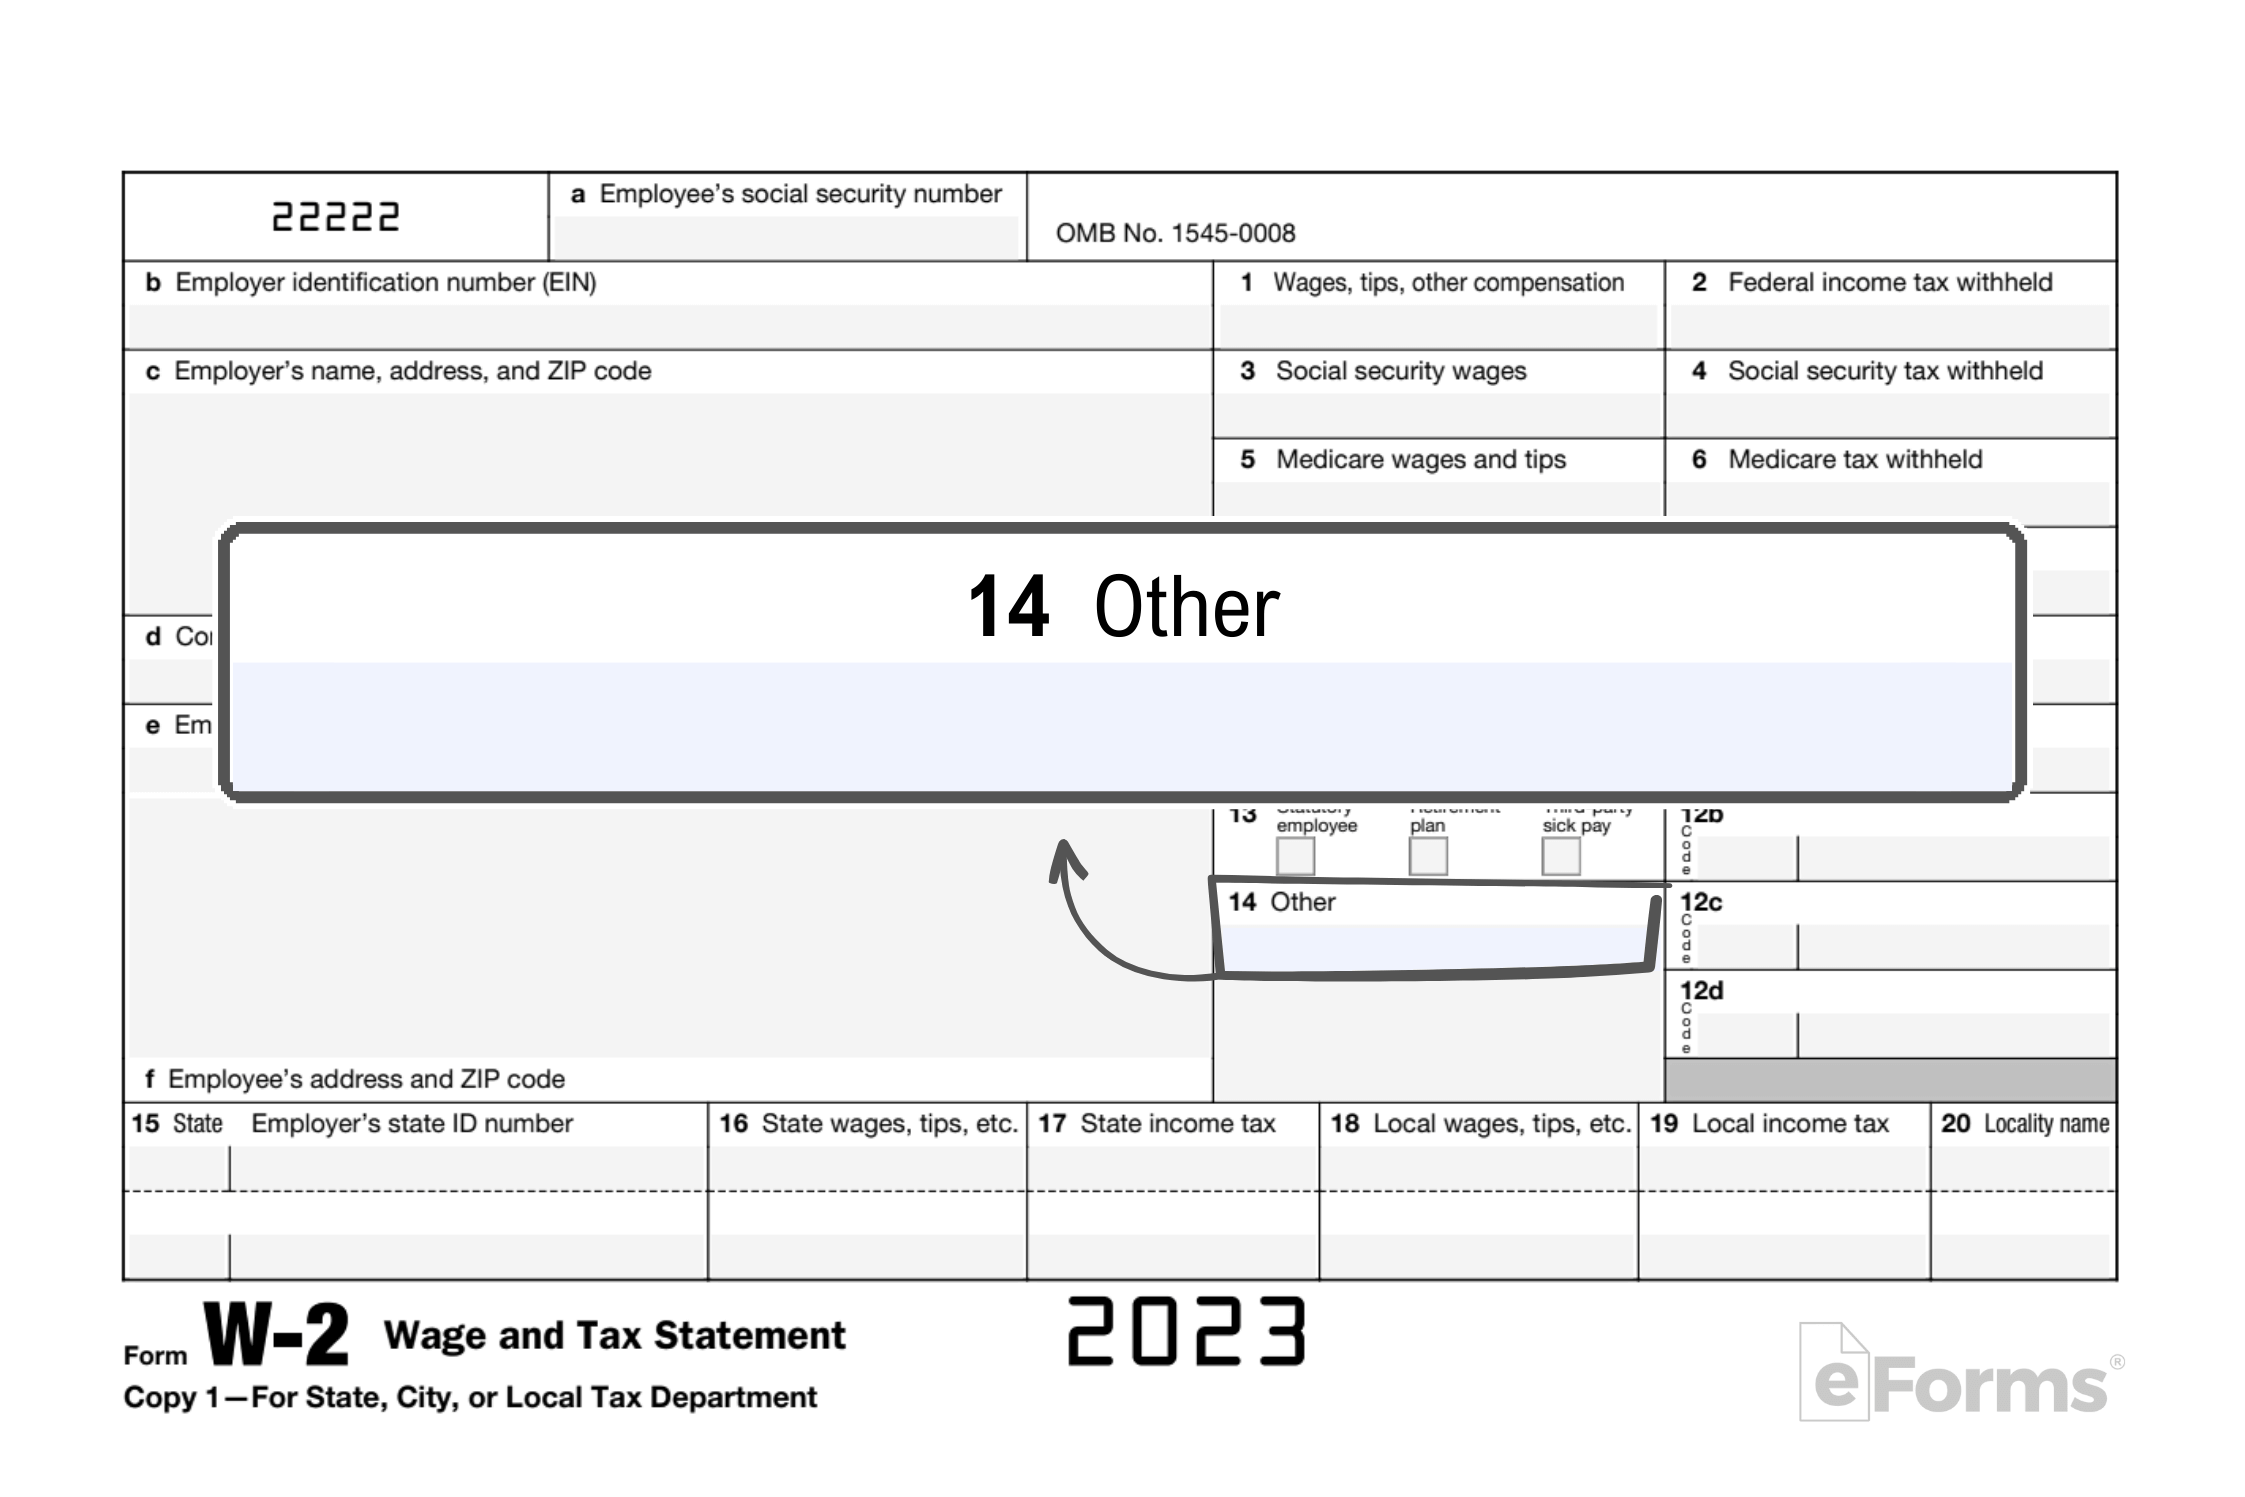 Free Irs Form W-2 | Wage And Tax Statement - Pdf – Eforms intended for Irs 2022 W2 Form Pdf